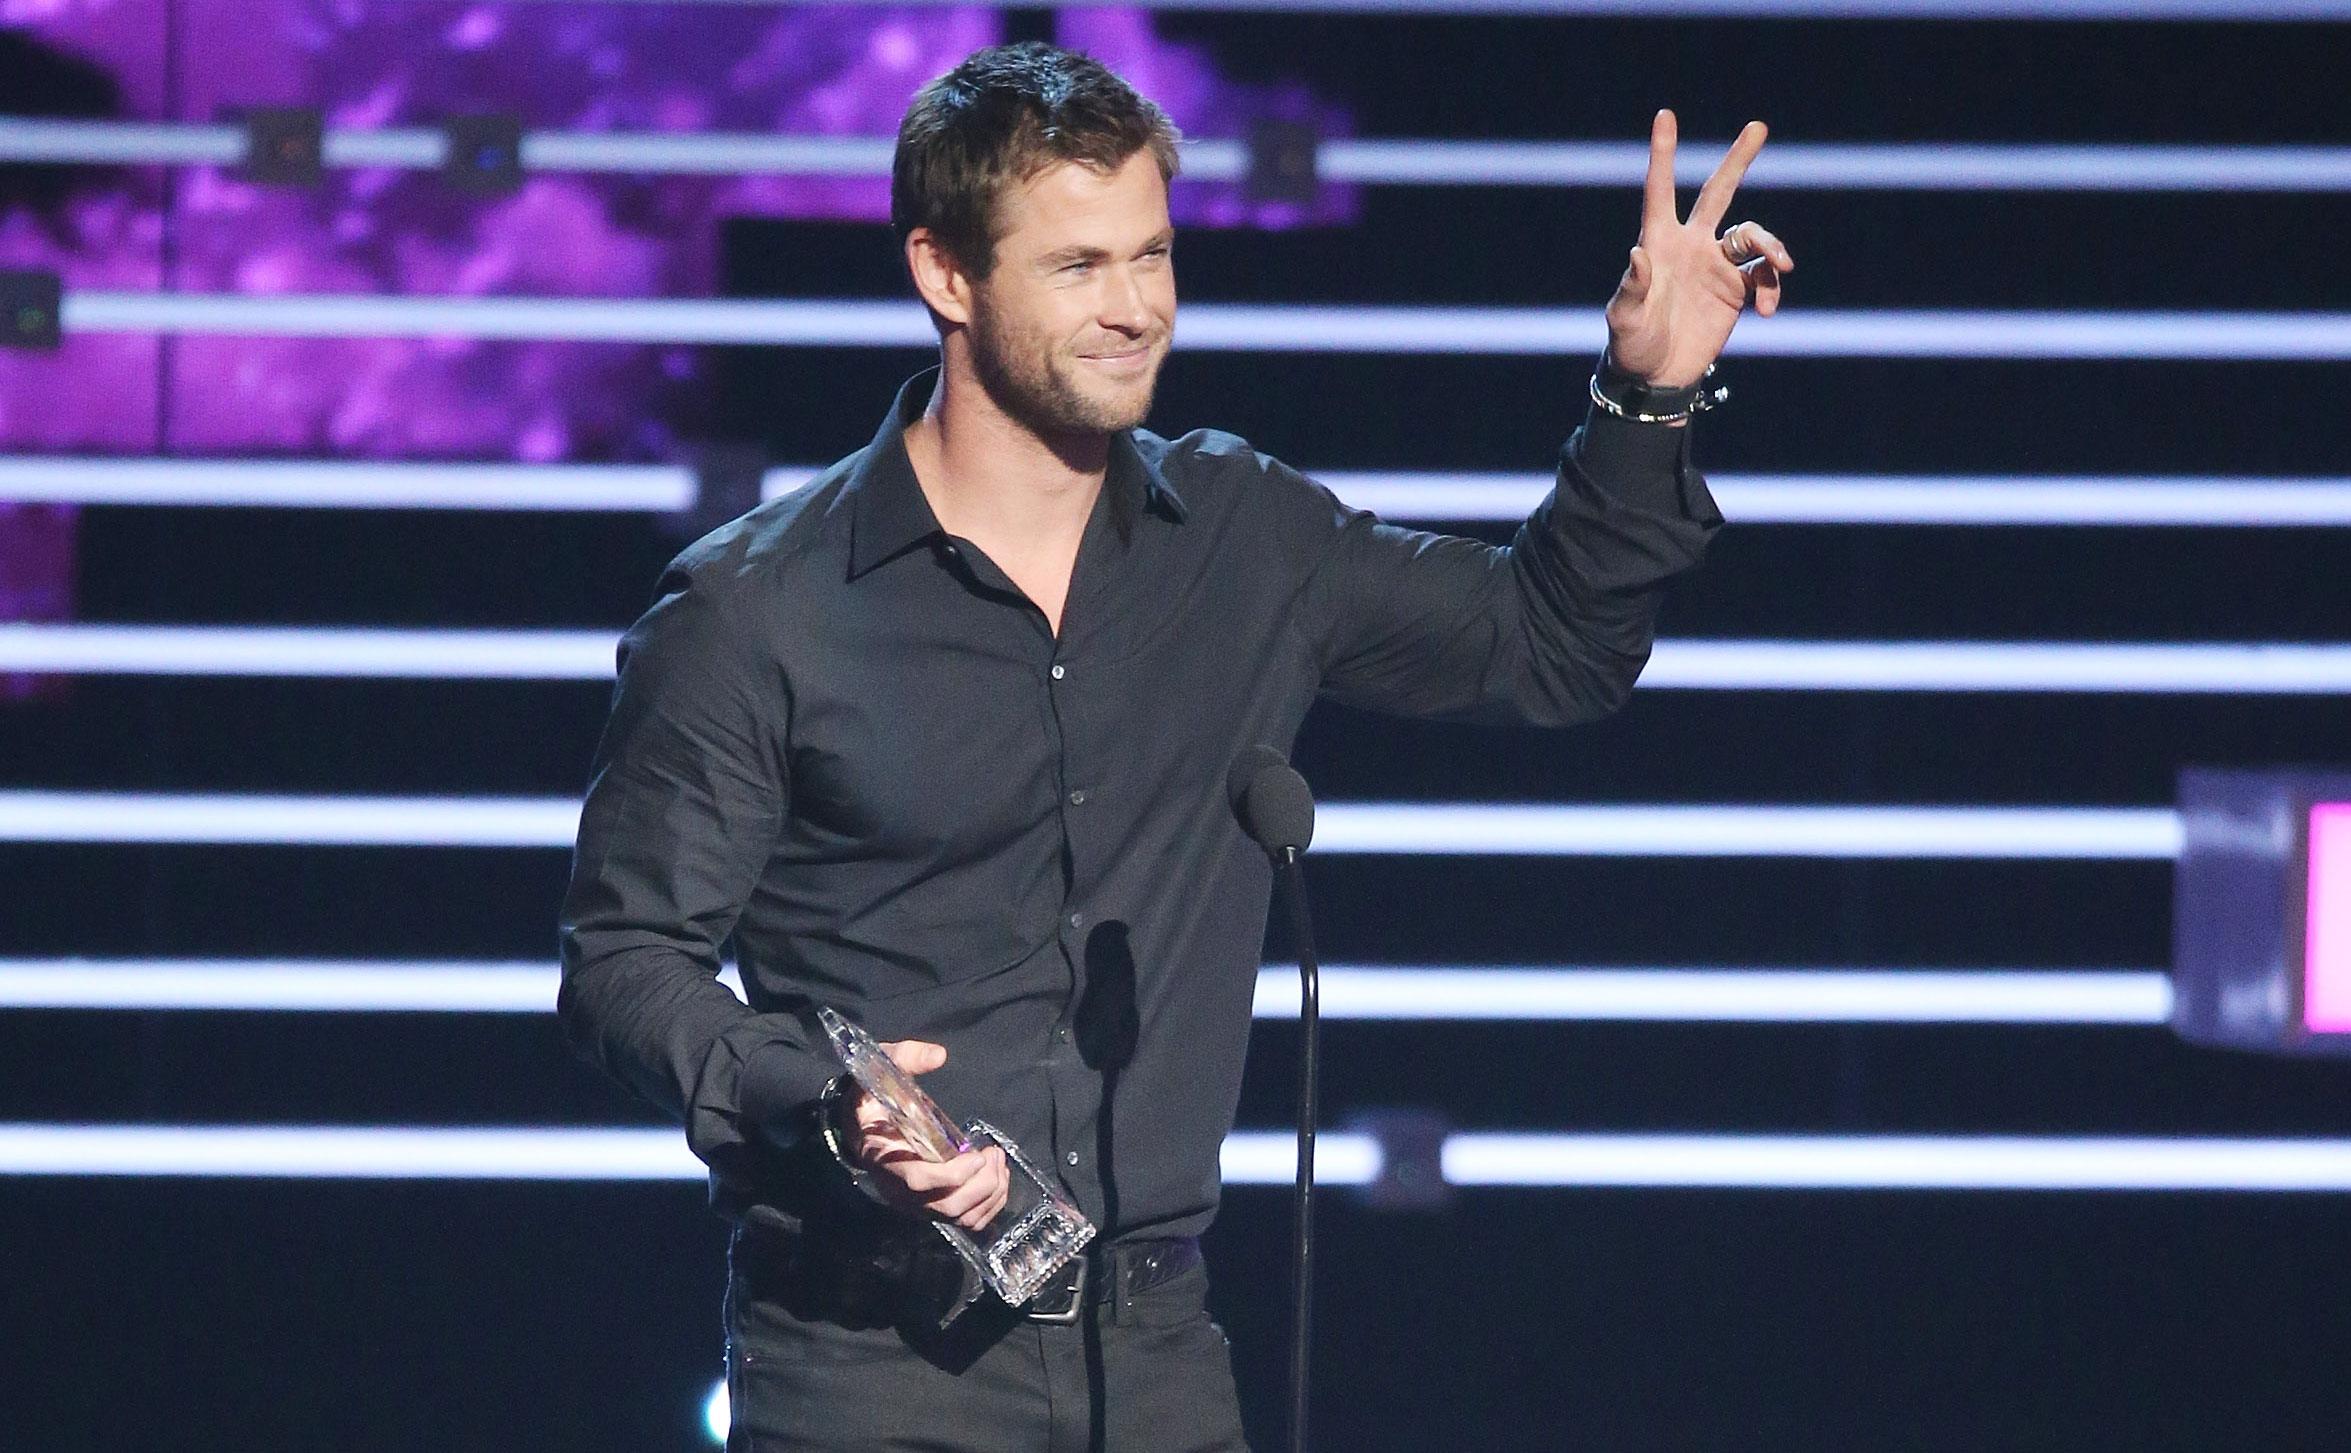 Chris speaks on stage at the People's Choice Award.